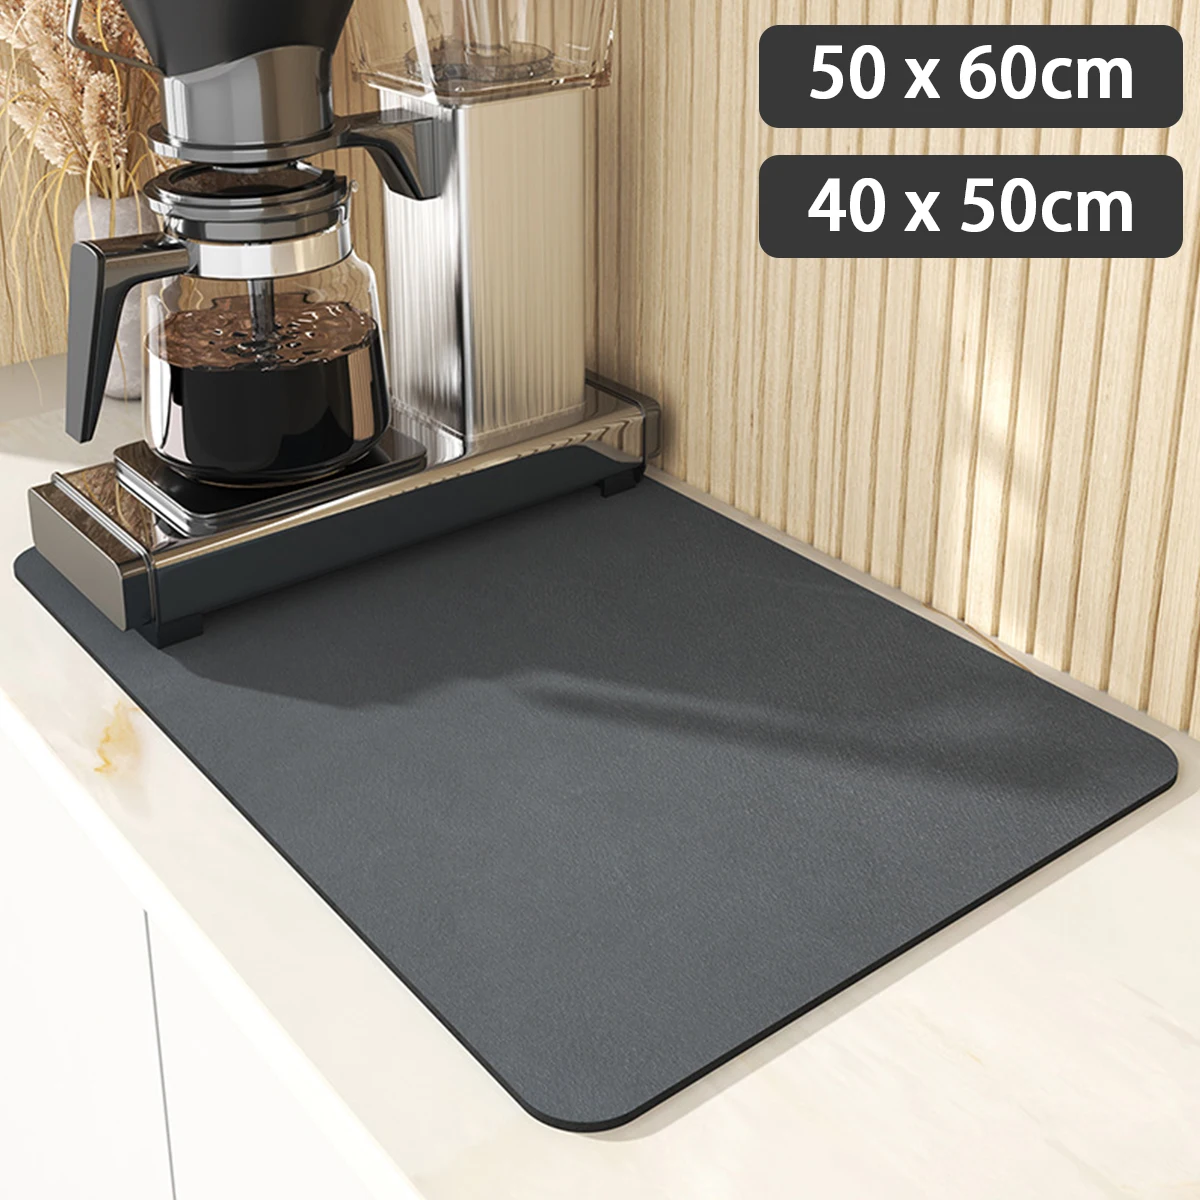 XL Large Dish Drying Mats for Kitchen Counter, Absorbent